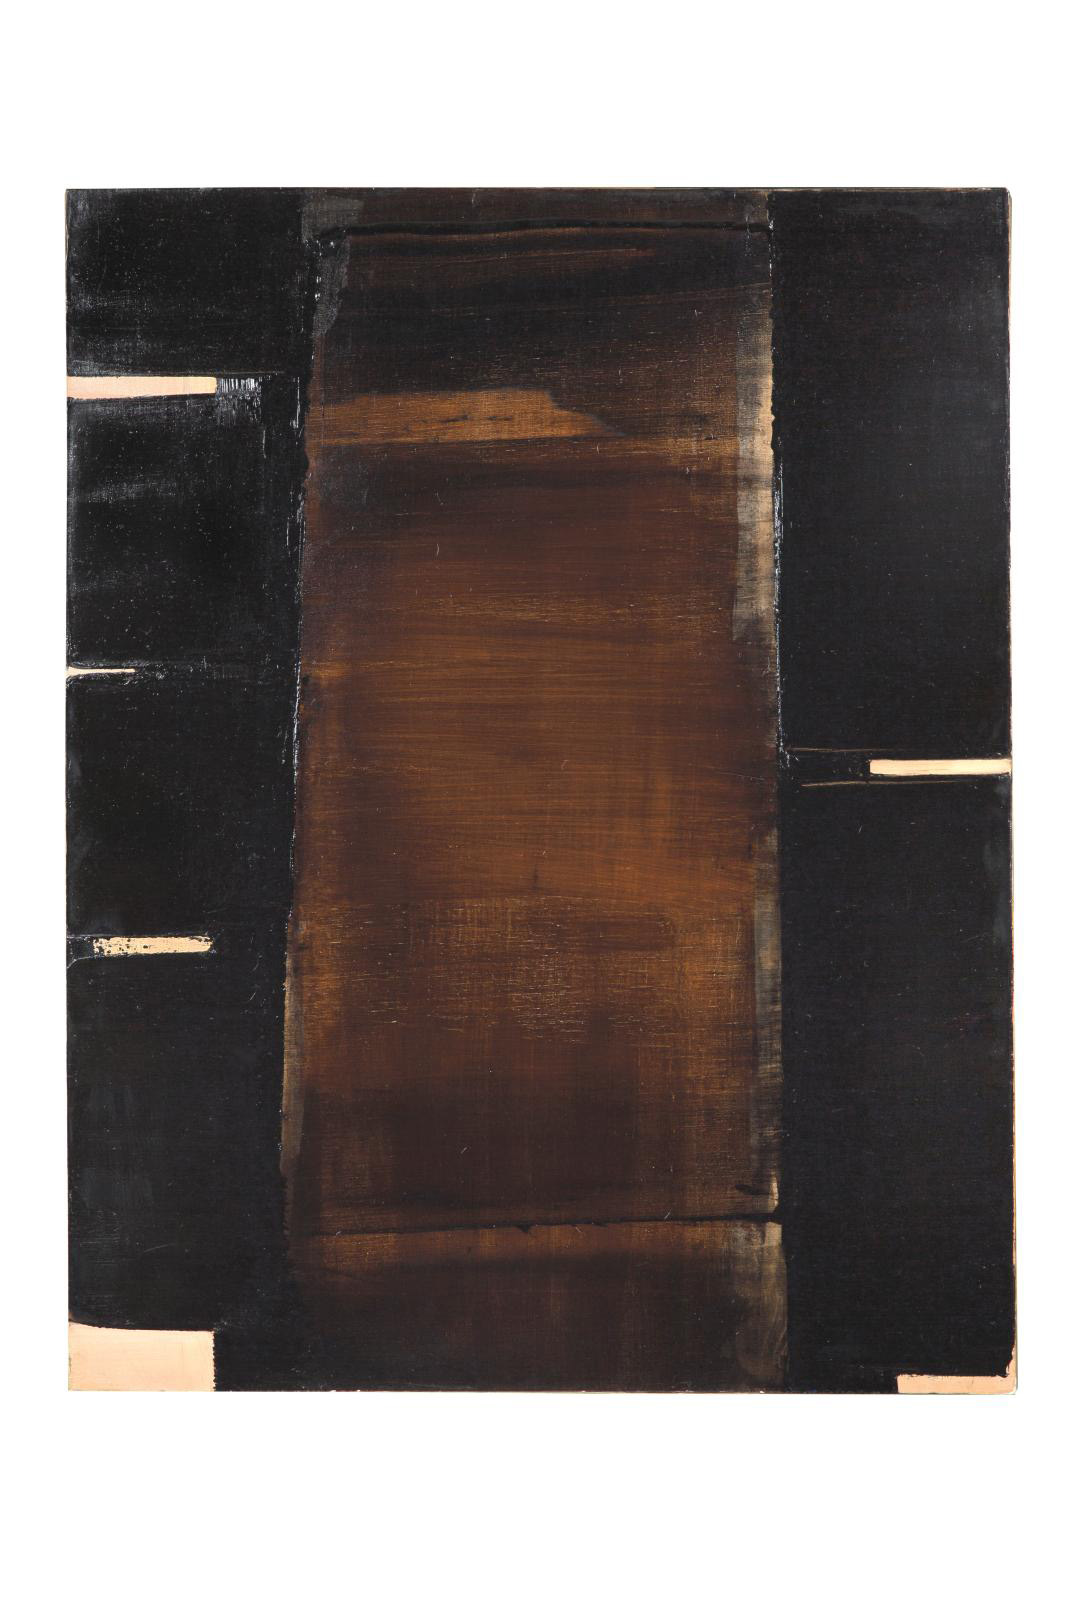 Pierre Soulages, Light as Material